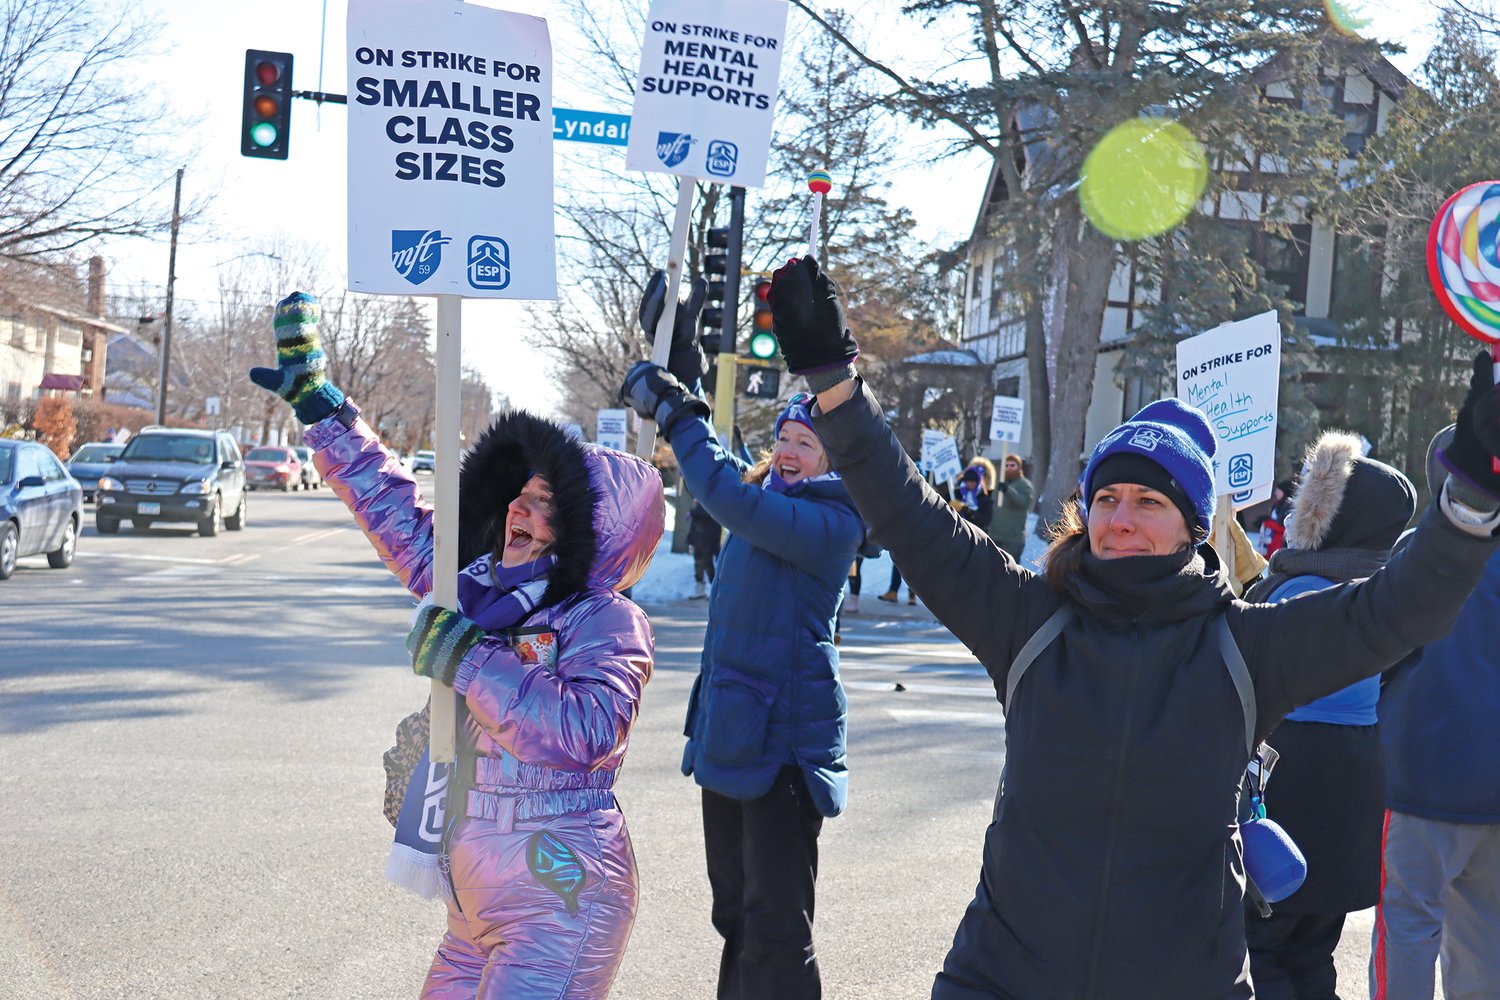 Crystal Spring (theater teacher at Washburn and South High), at left, and Melissa Favero (fourth grade teacher at Barton School) picket at Nicollet and 46th St. on March 11.  (Photo by Tesha M. Christensen)